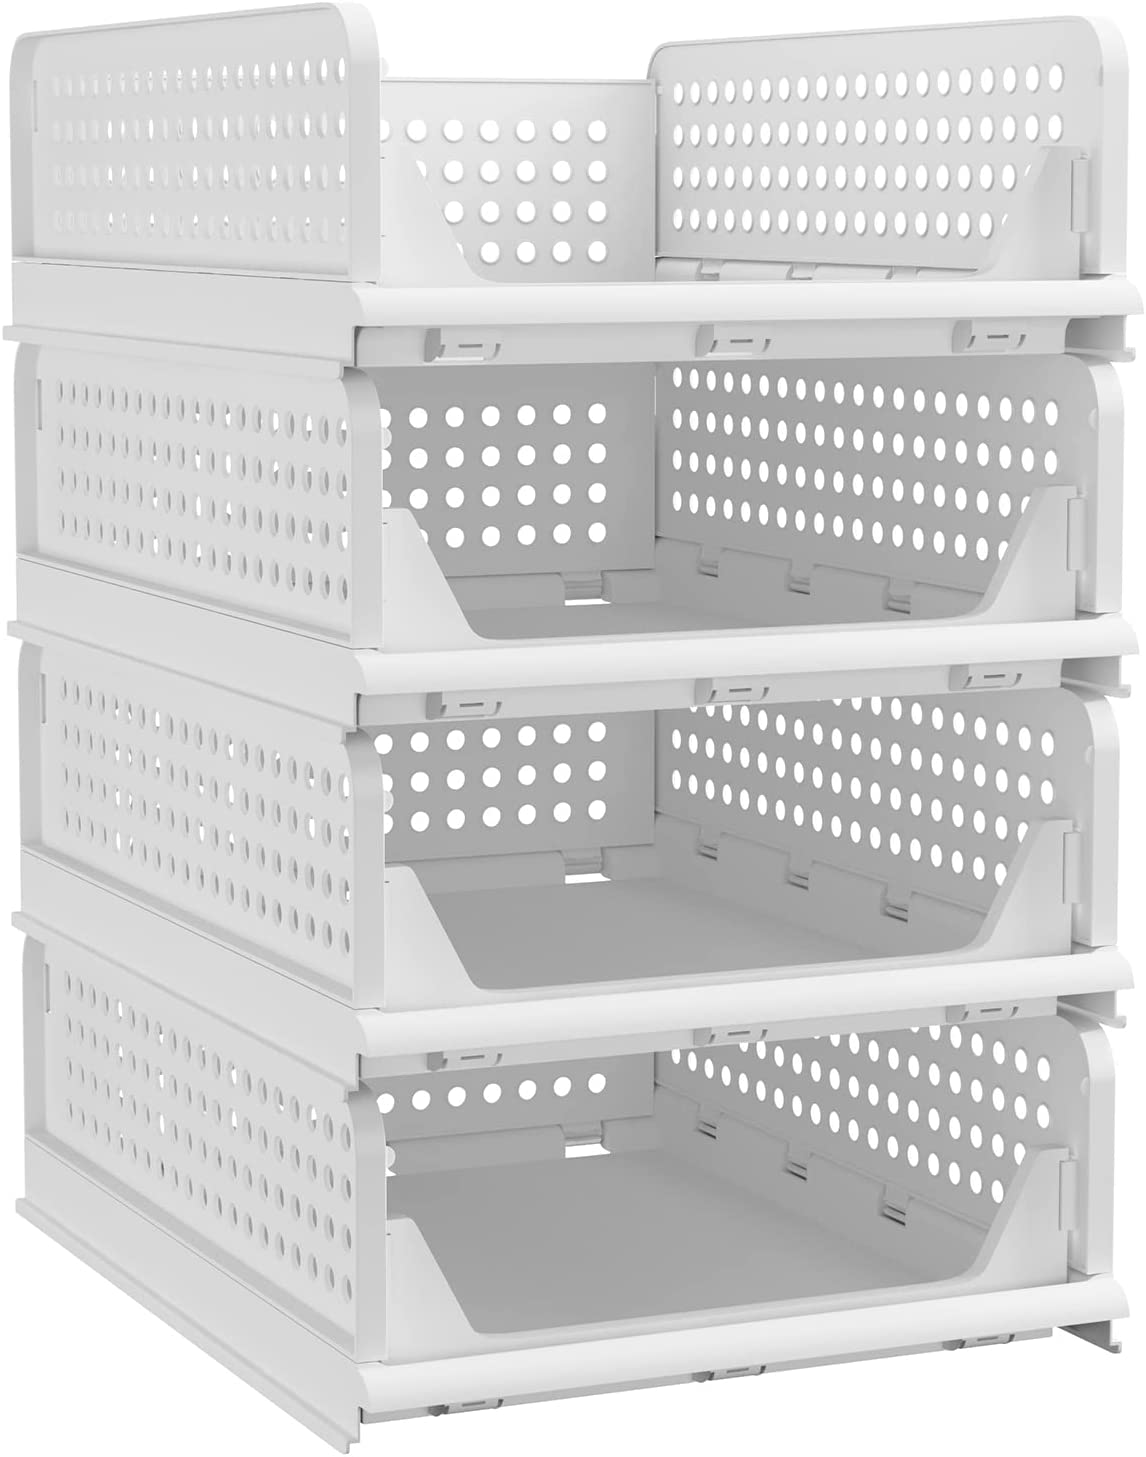 Phyllia 4 Pack Closet Organizers Storage Bins, Plastic Stackable Drawer Basket, Foldable Clothing Storage for Kitchen Cabinets, Pantry, Offices